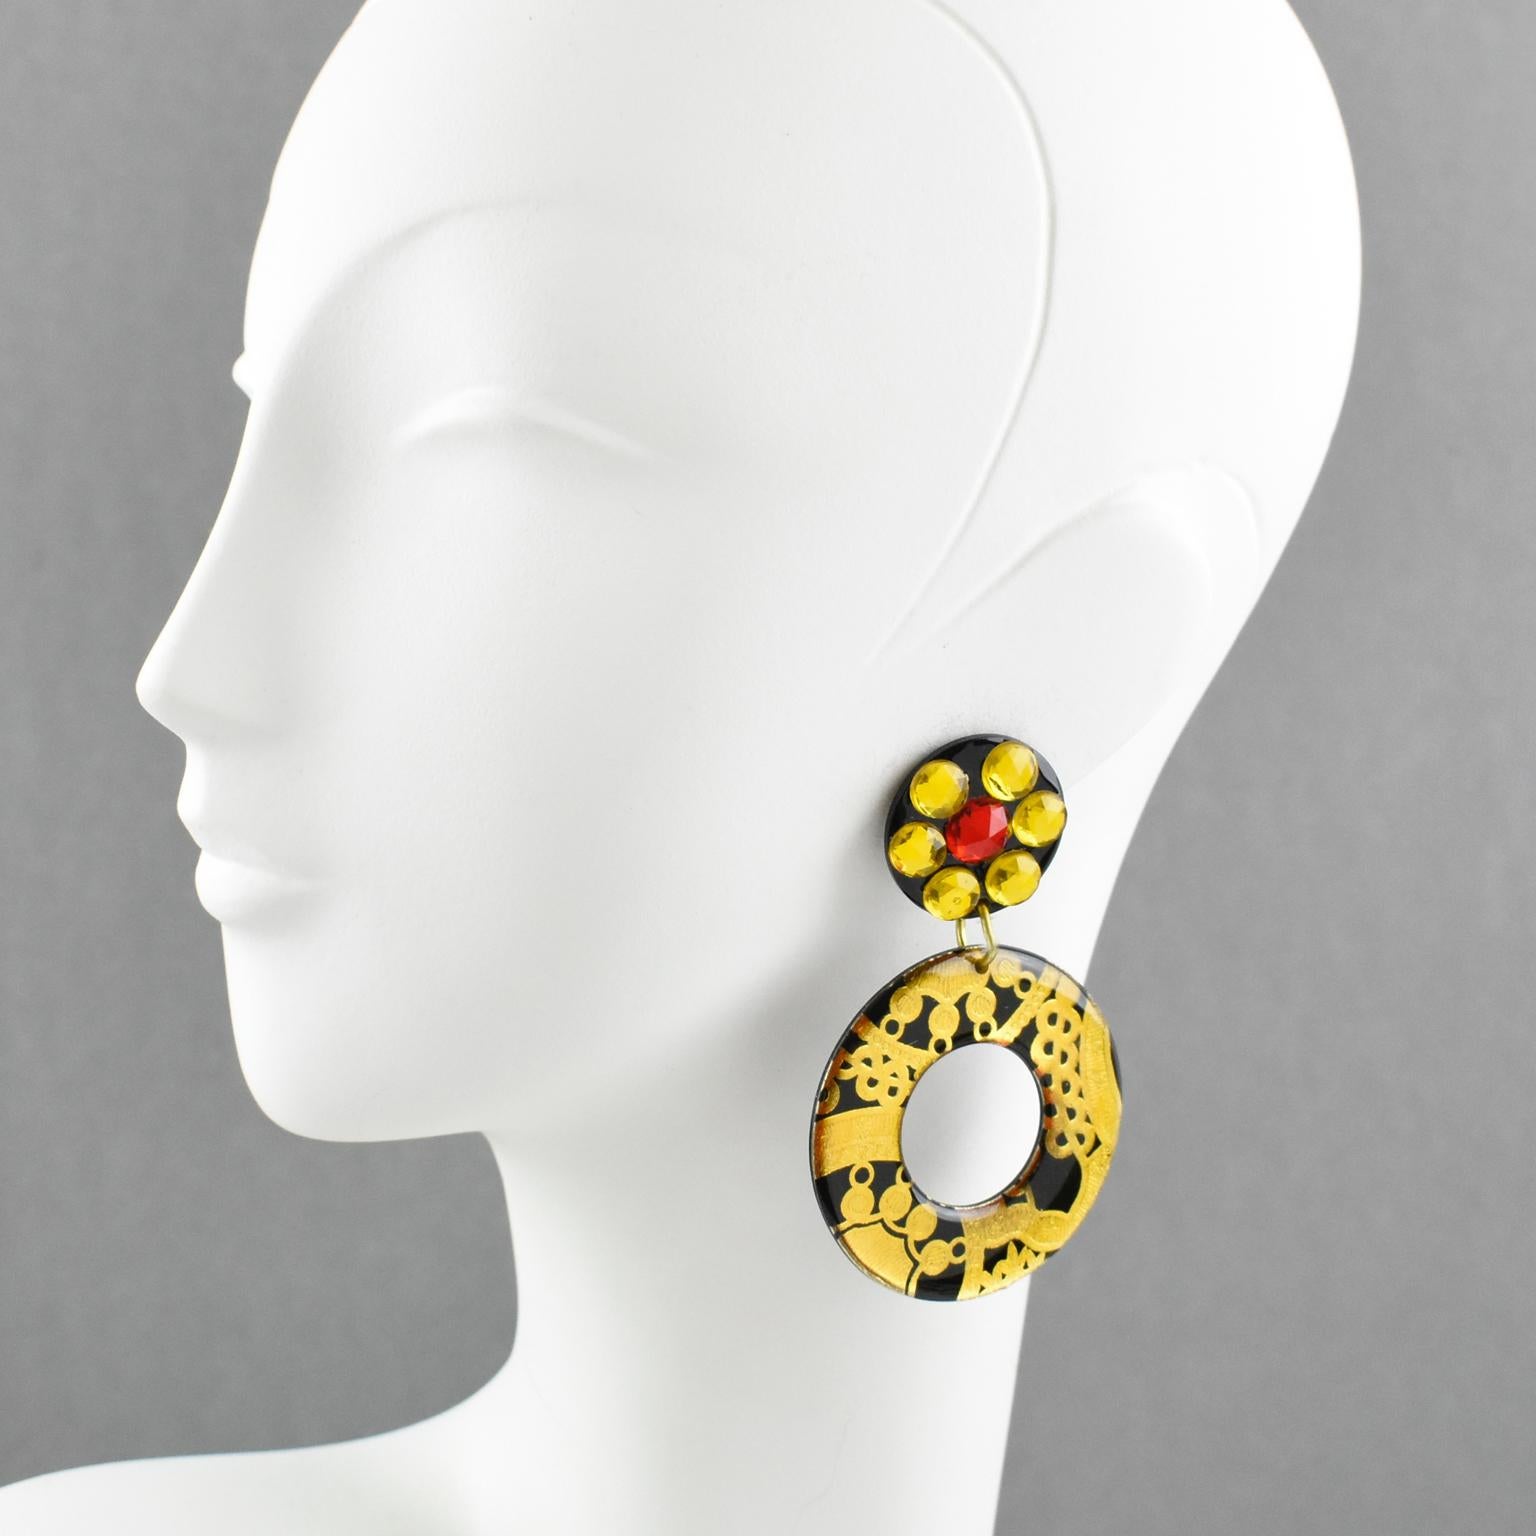 Incredible Italian Lucite dangling clip-on earrings. They feature an oversized donut shape with a baroque design in black and gold colors. The earrings are also ornate with saffron and red crystal rhinestones. 
This is a total eye-catching Pop Art